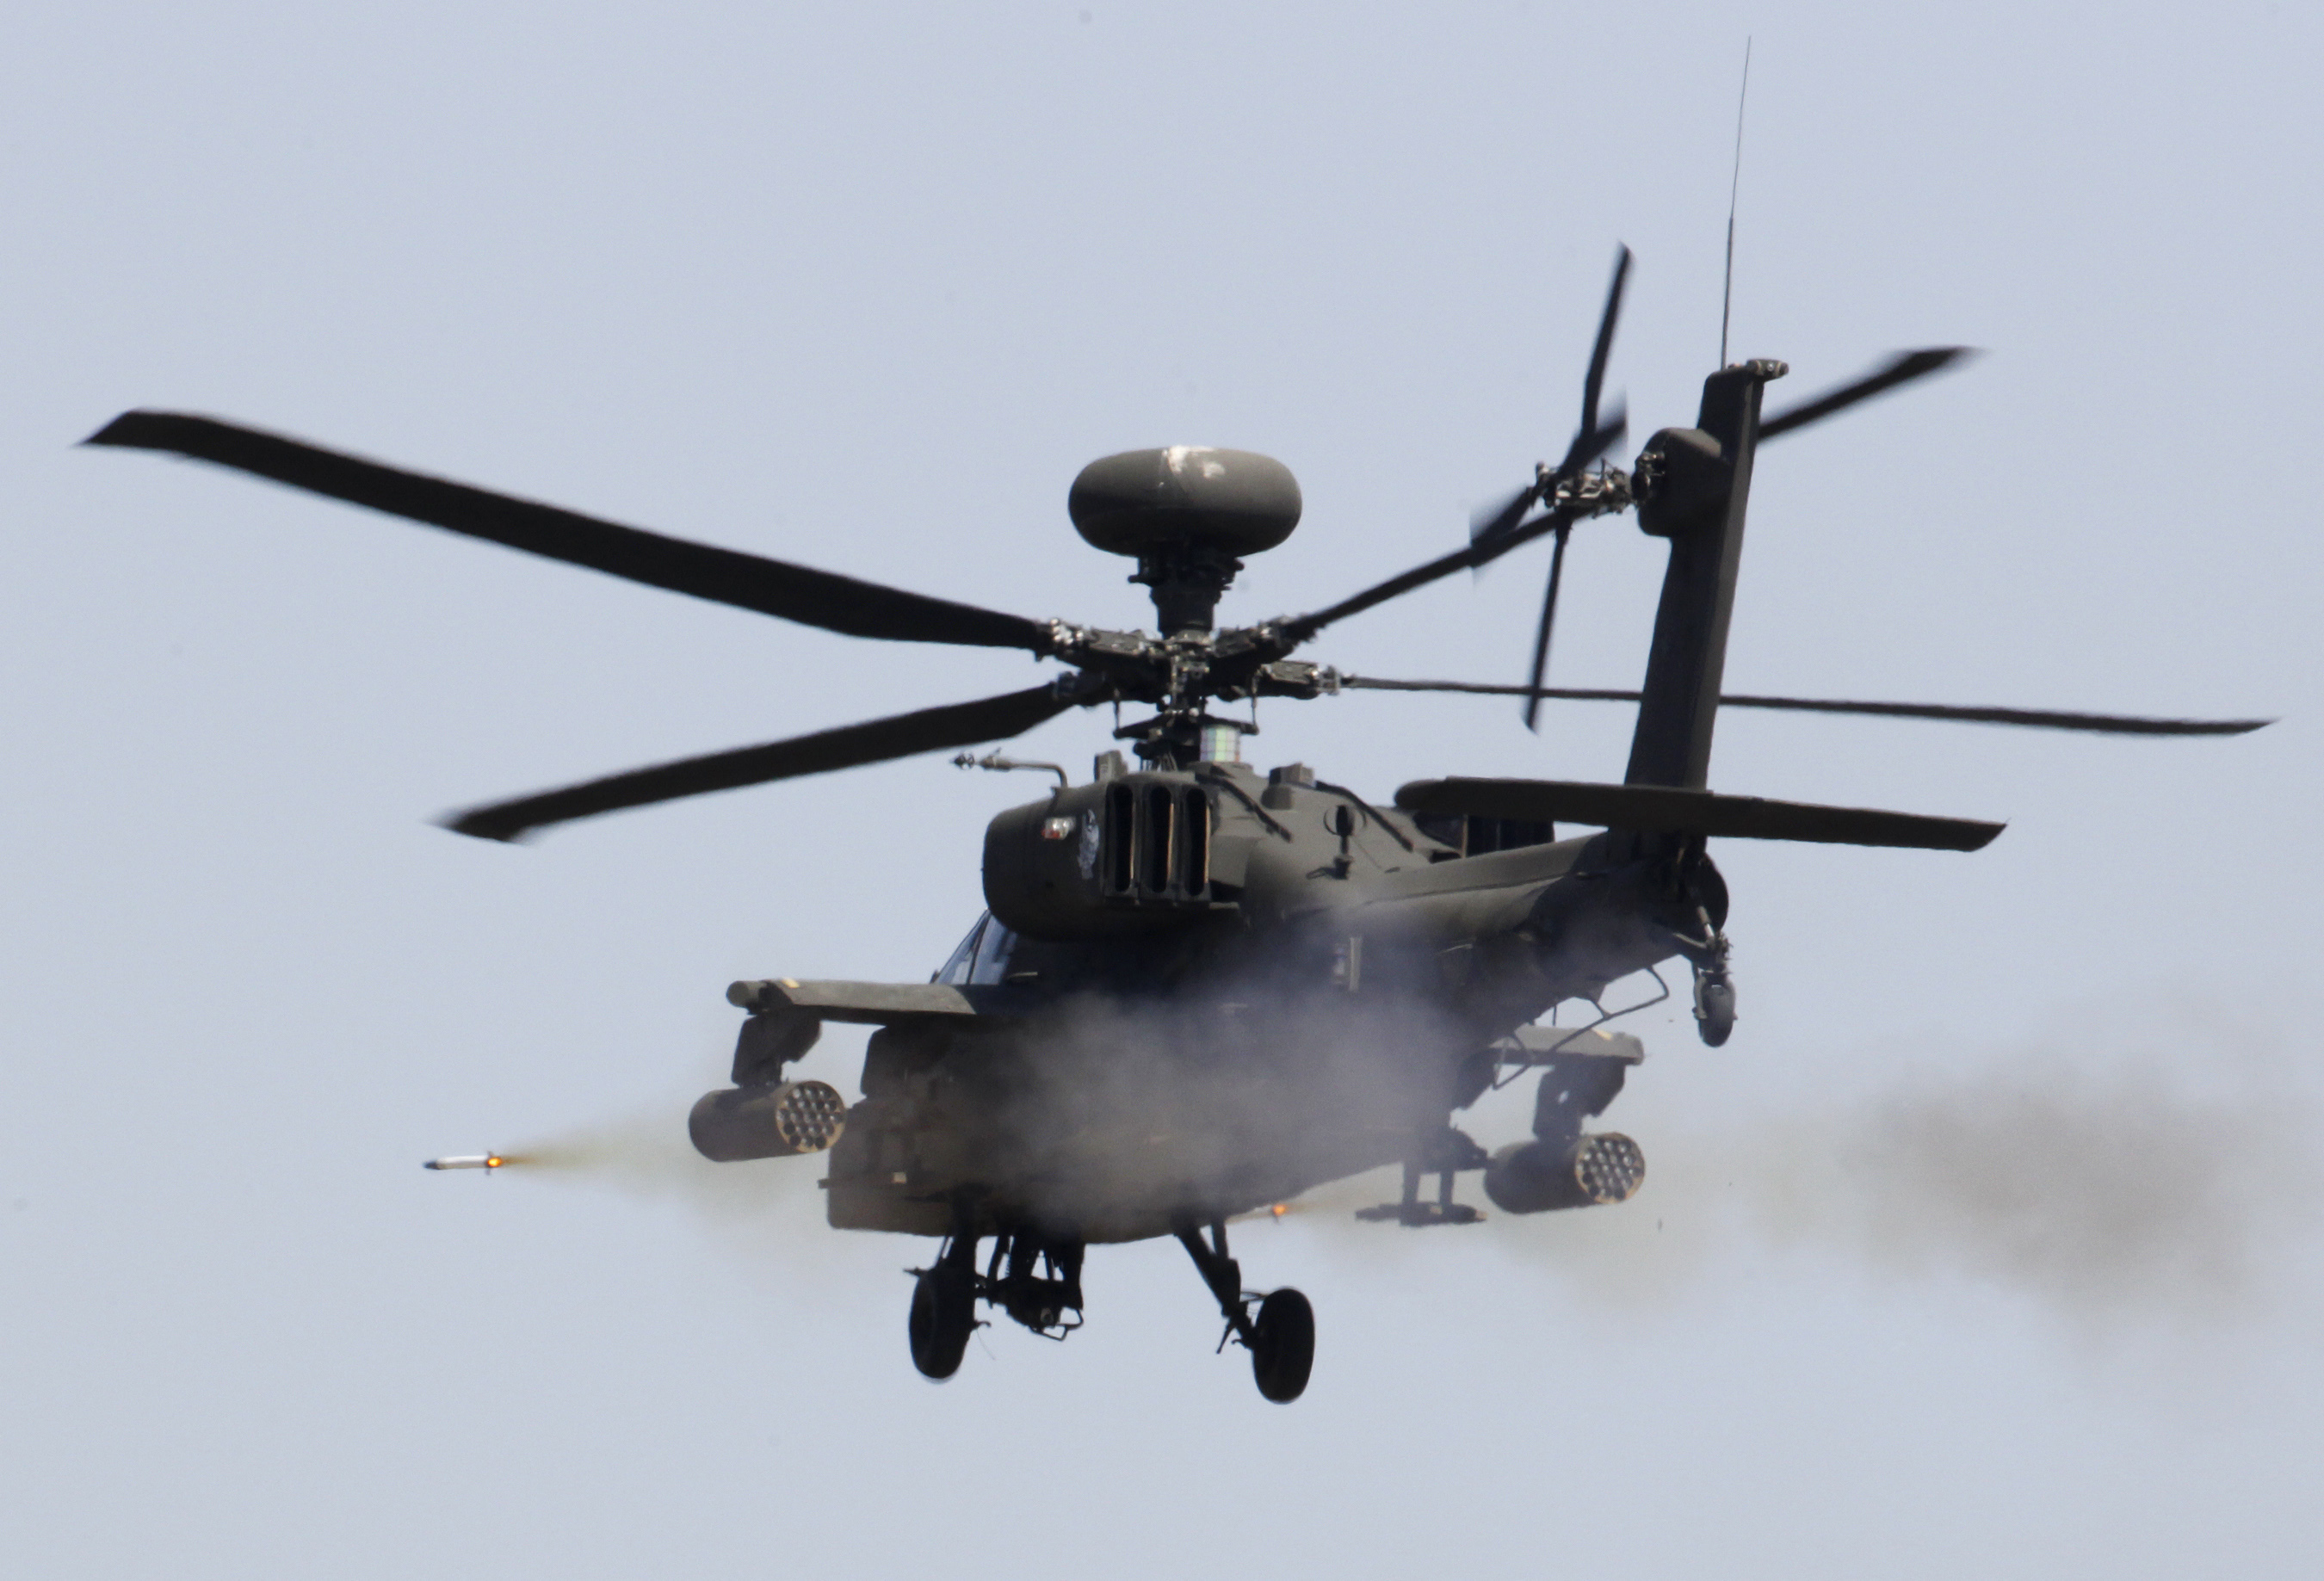 AH-64 Apache helicopters like this one arrived in Baghdad on Sunday. (Jo Yong hak / Reuters)